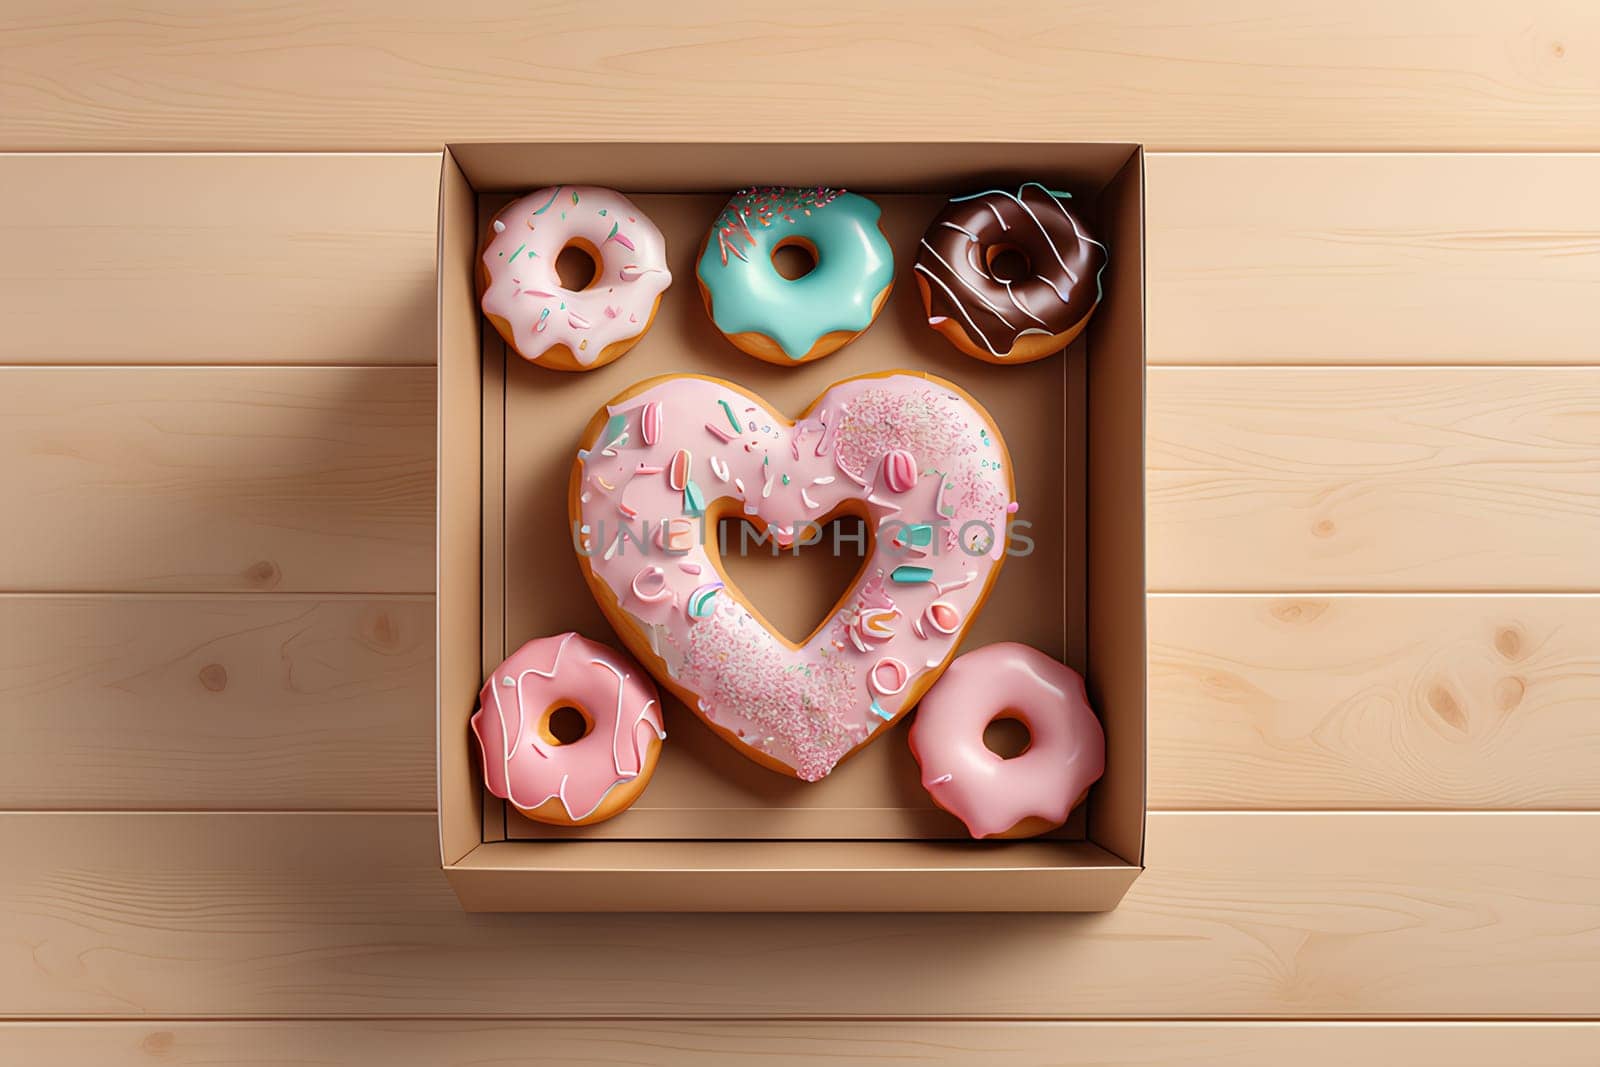 Donut in the shape of a heart. Valentine's Day Gift Concept